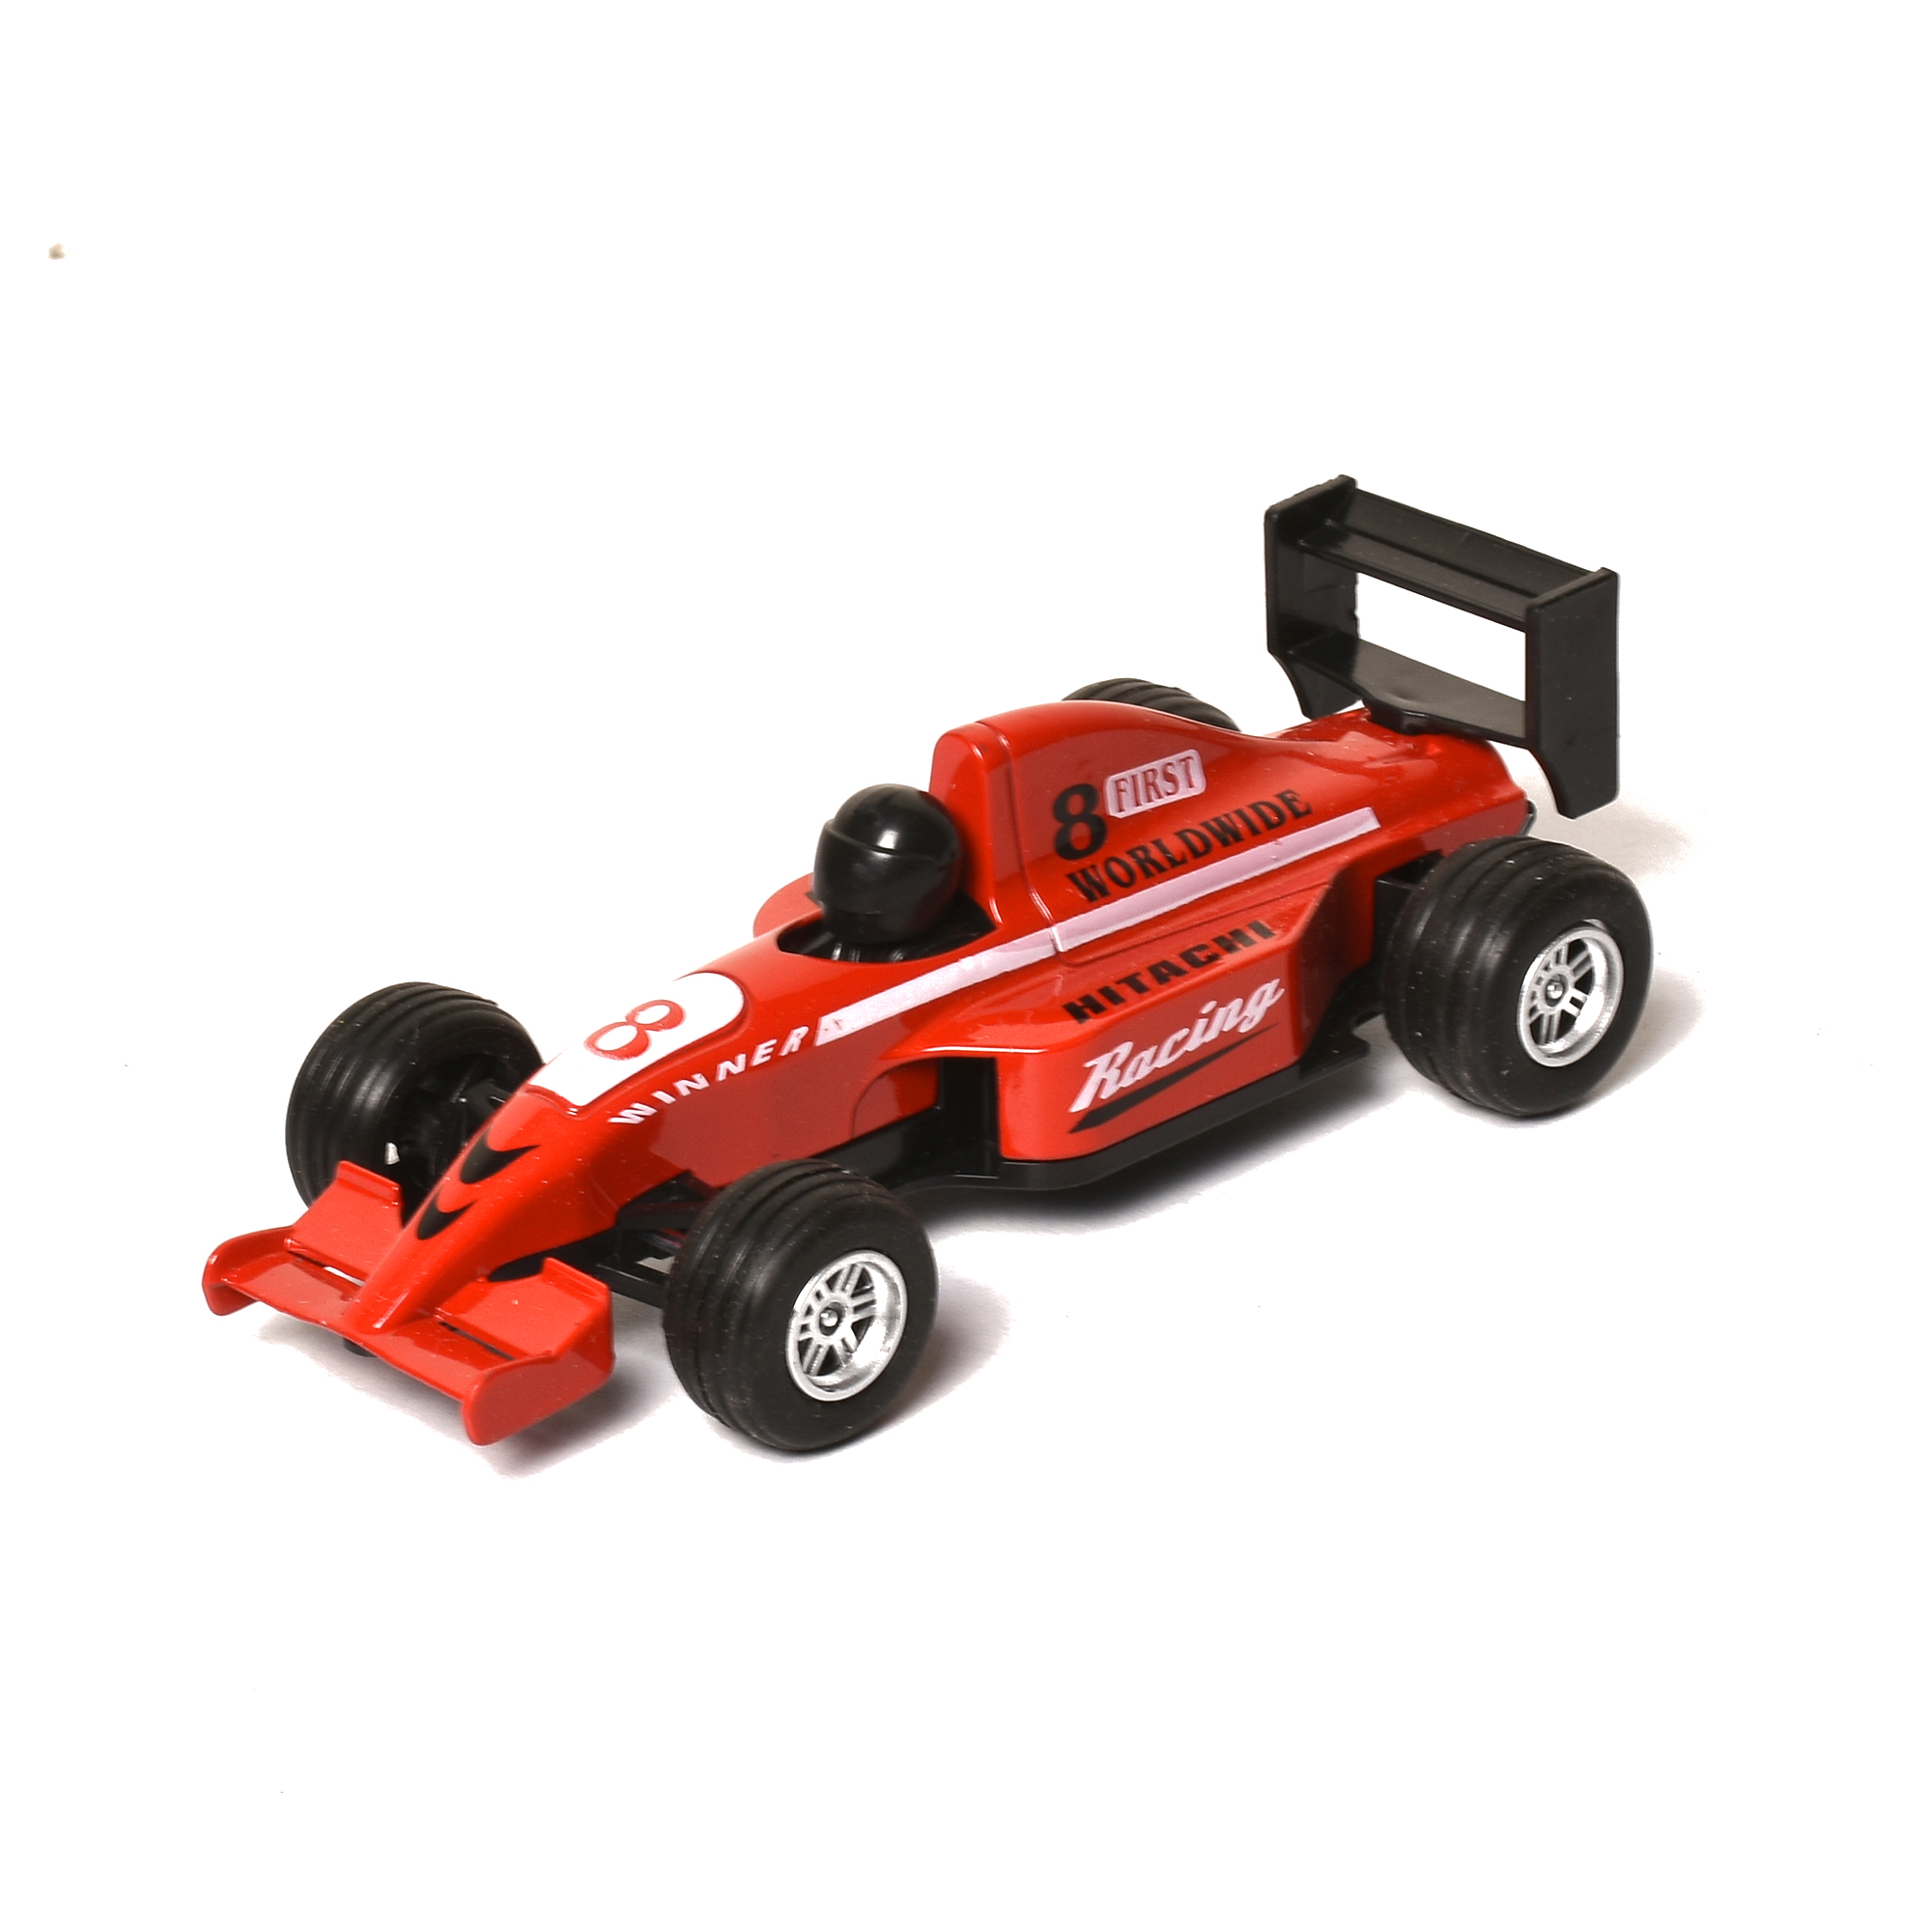 Braintastic Pullback Friction Simulation Model Small Size Racing Car Miniature Vehicle Toys for Kids Age 3 + (Red)